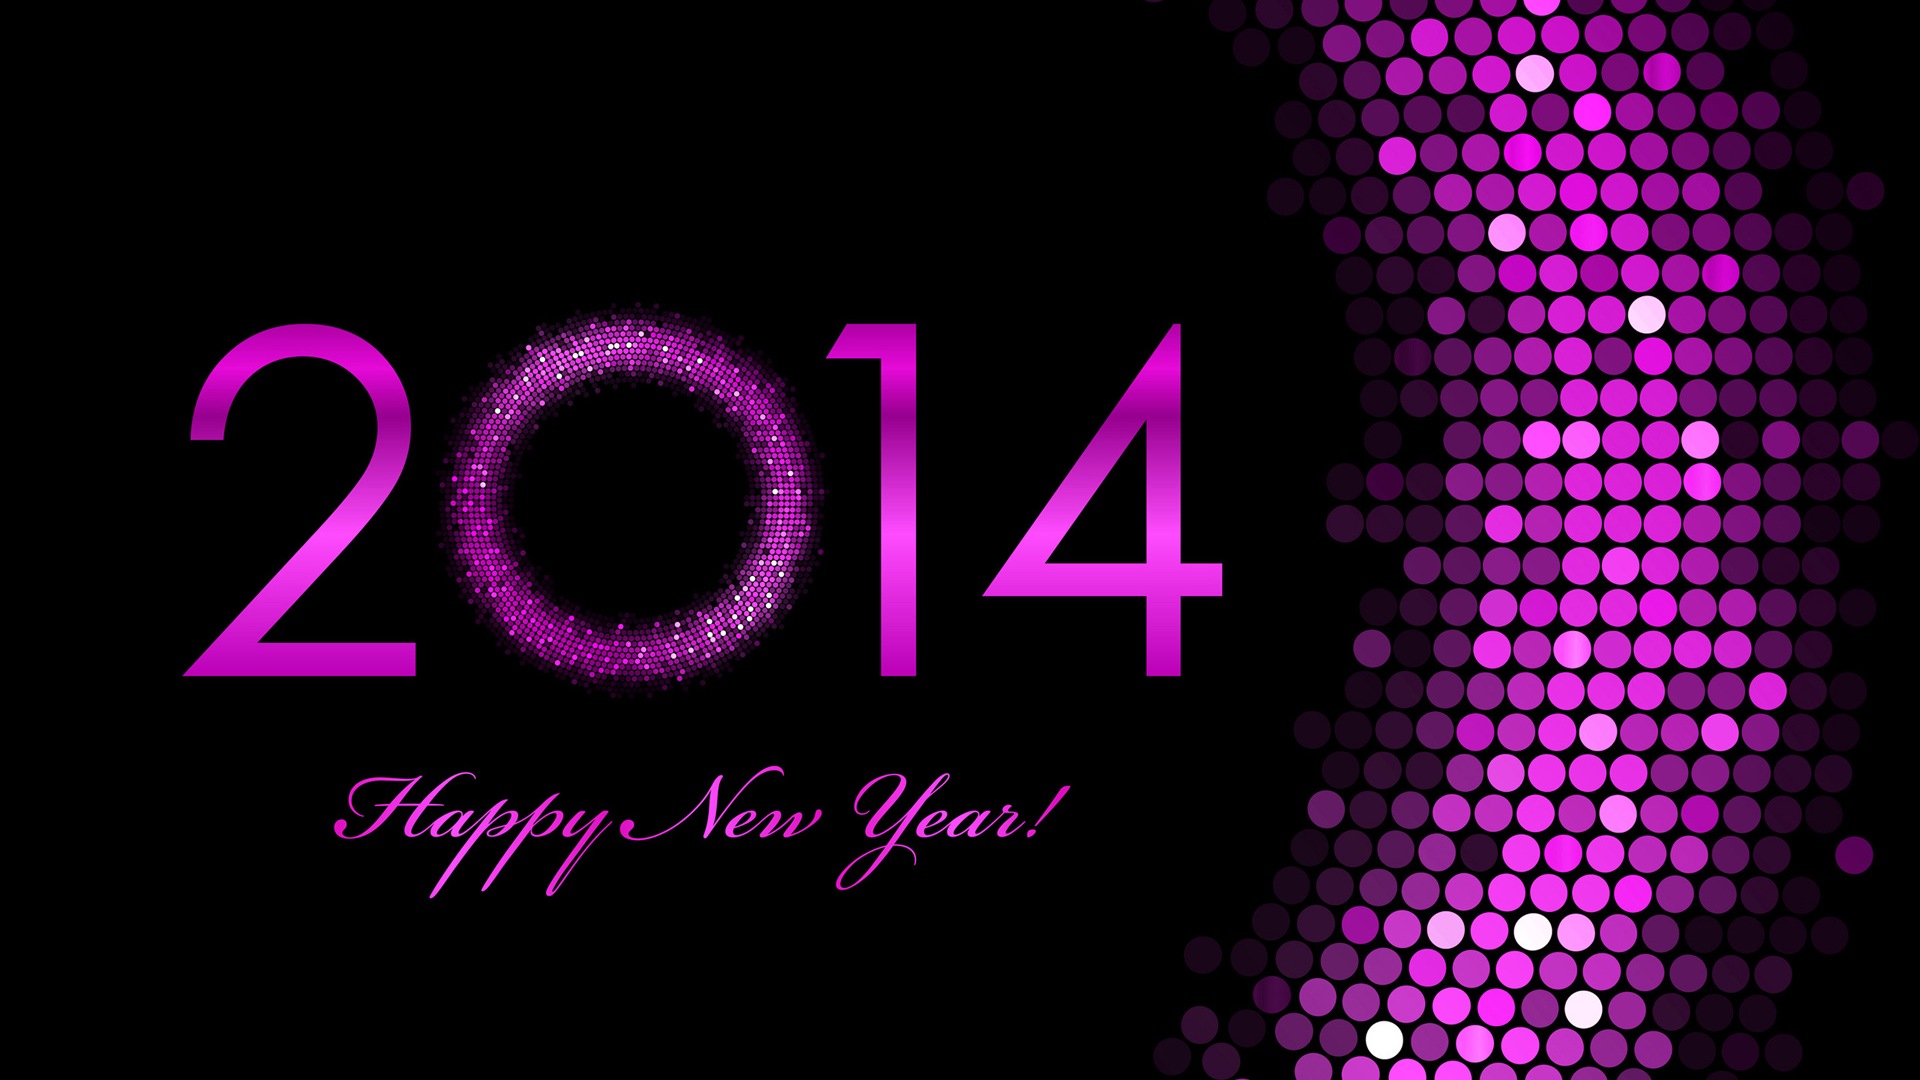 2014 New Year Theme HD Wallpapers (2) #1 - 1920x1080